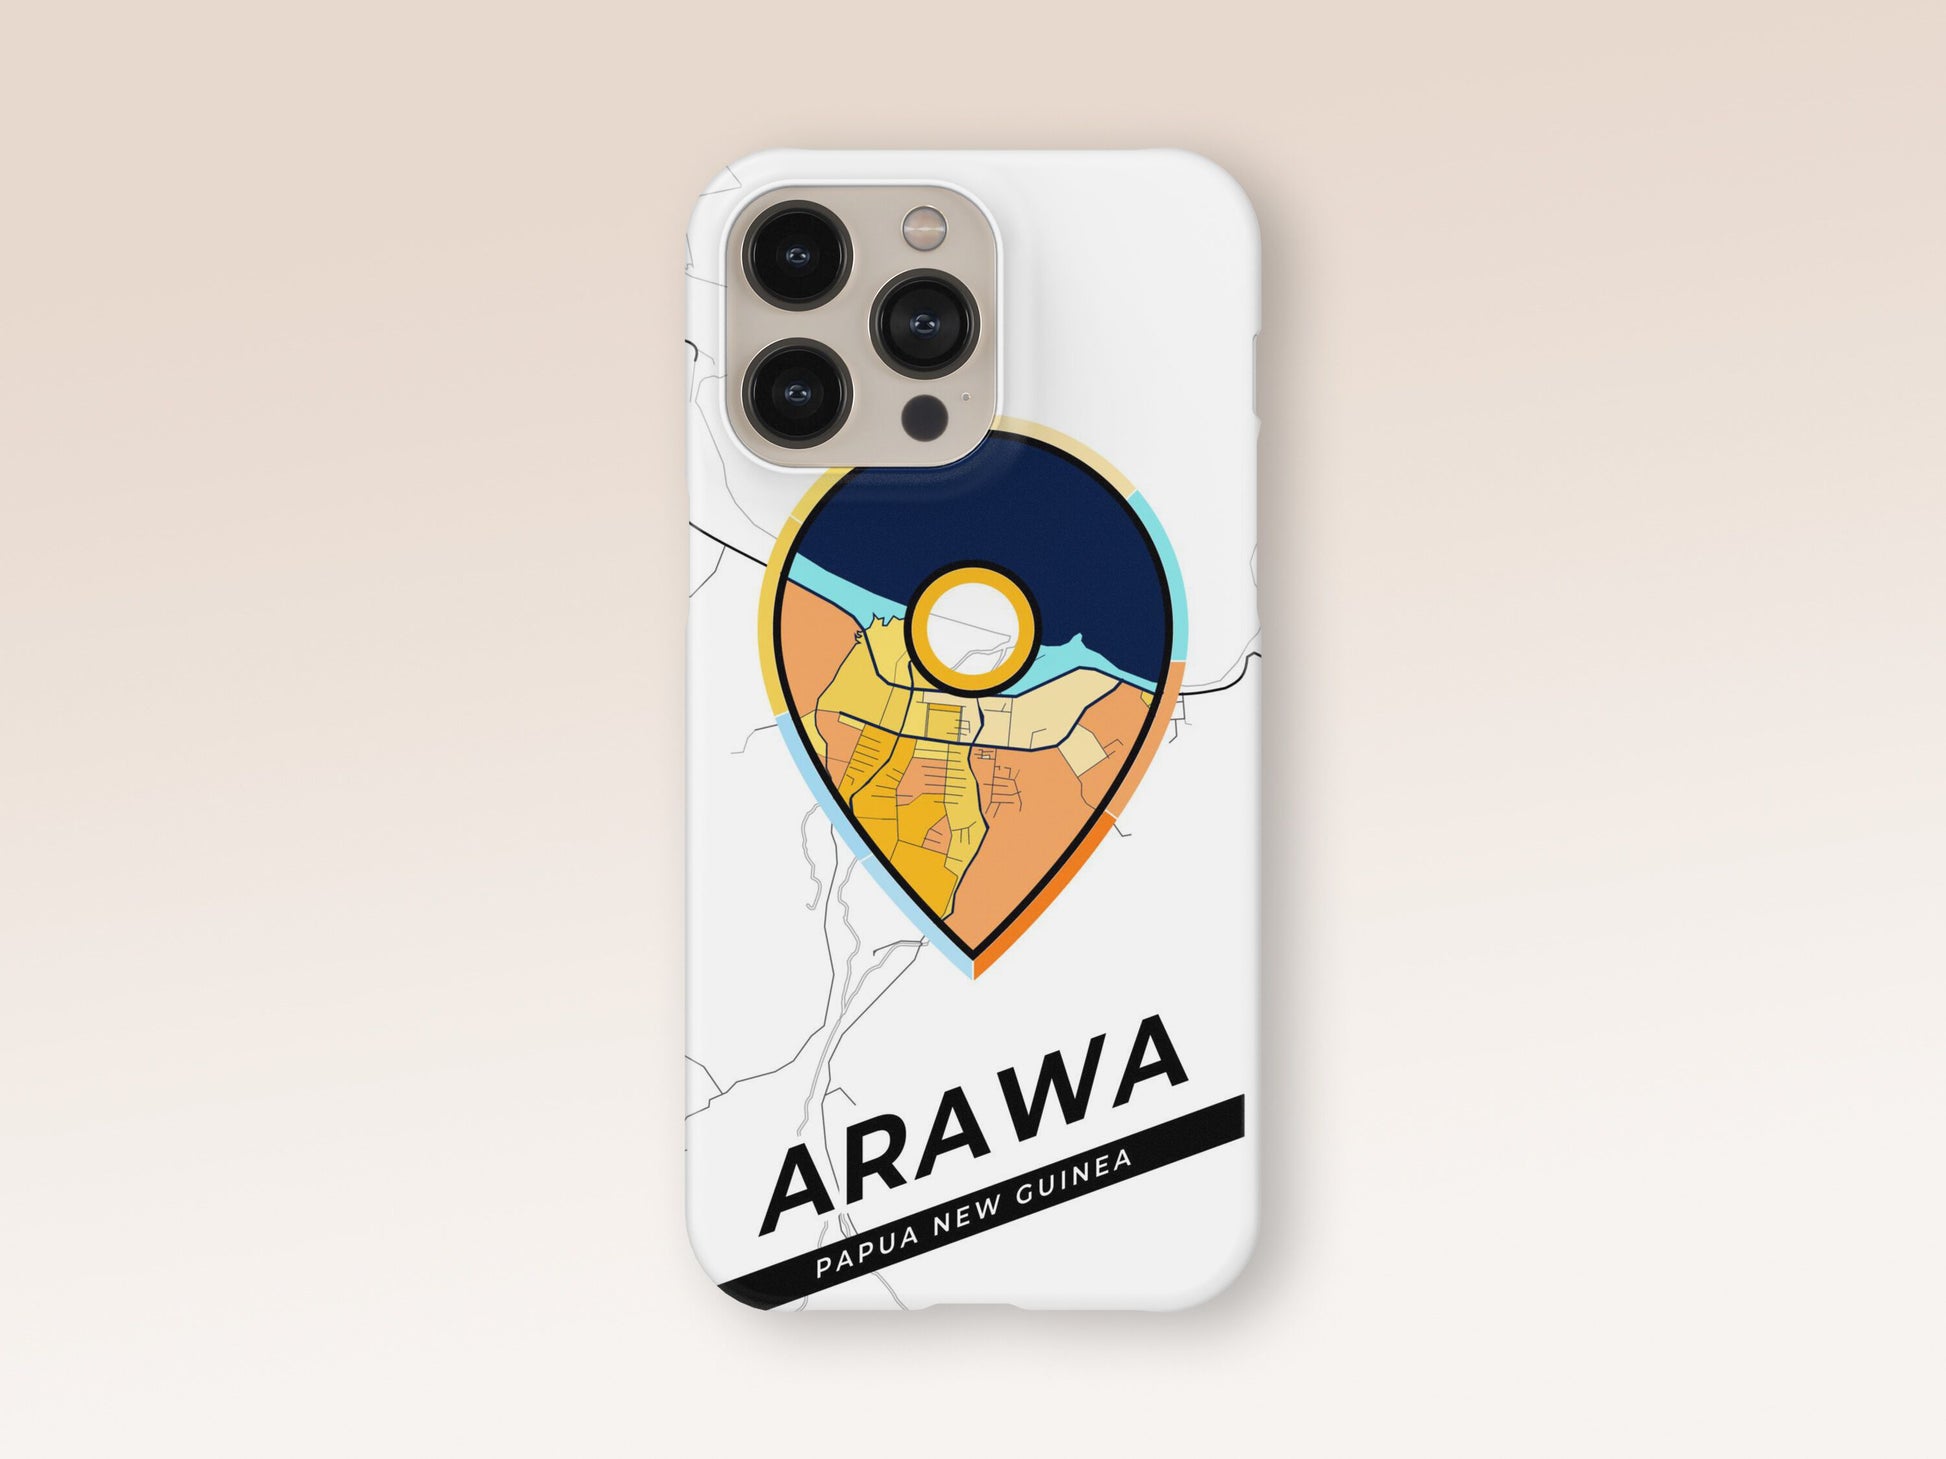 Arawa Papua New Guinea slim phone case with colorful icon. Birthday, wedding or housewarming gift. Couple match cases. 1